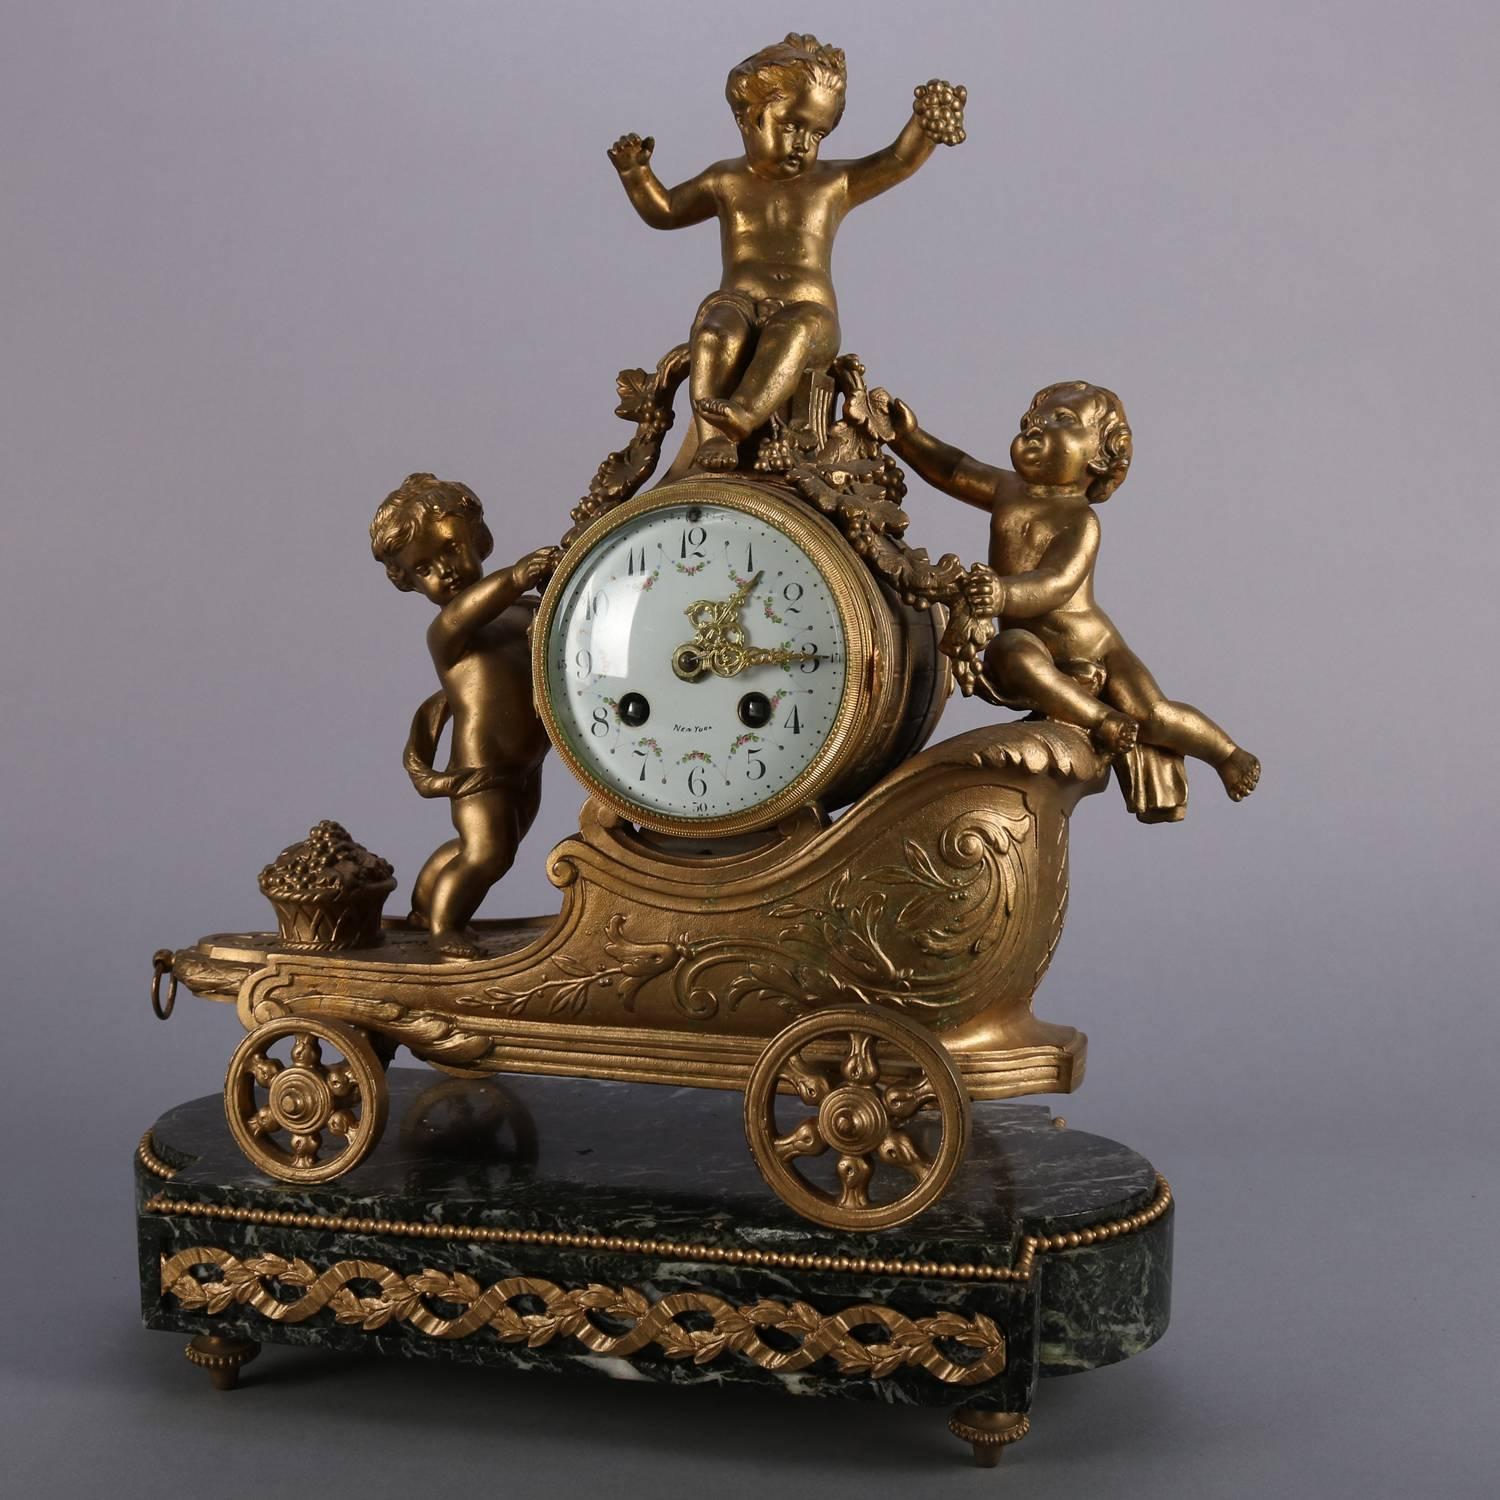 Antique French gilt metal figural mantel clock by S.H. Paris features cherubs with barrel form clock and chariot on marble base, hand painted floral decorated face has Arabic numerals and signed 